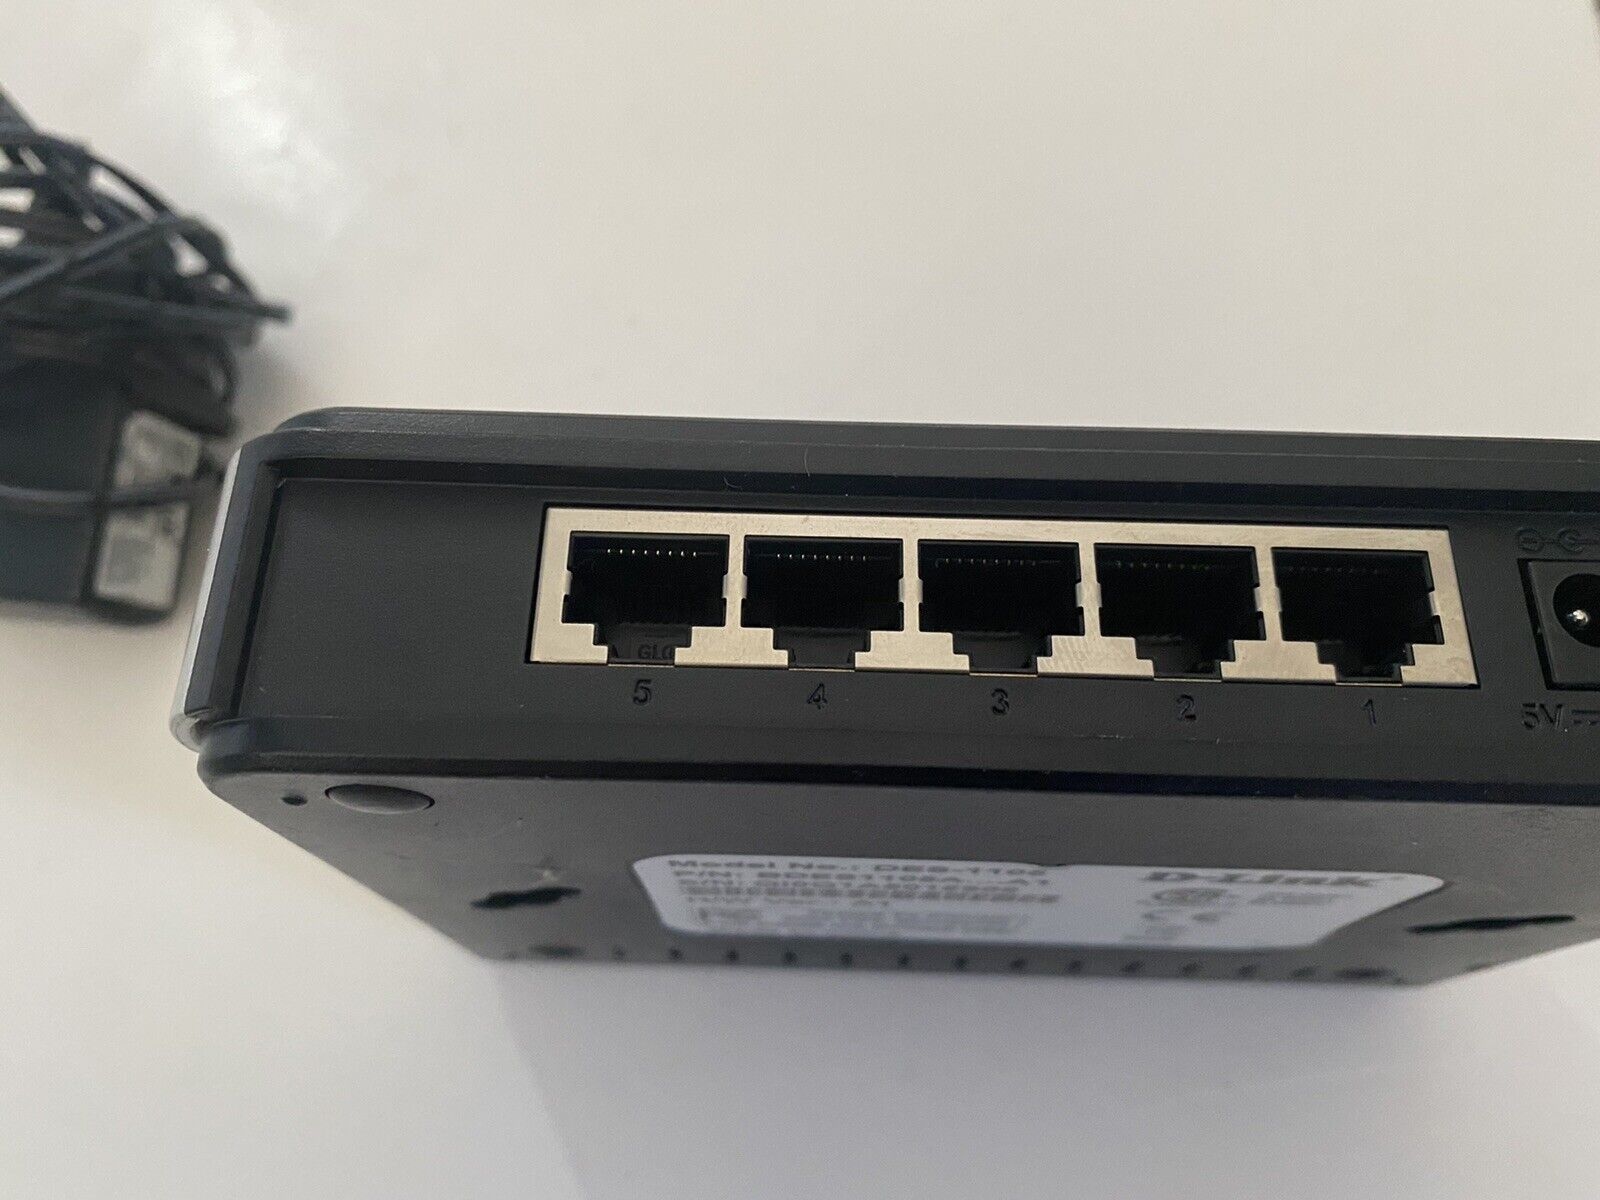 How to Connect MiFi to a Network Switch | Robots.net